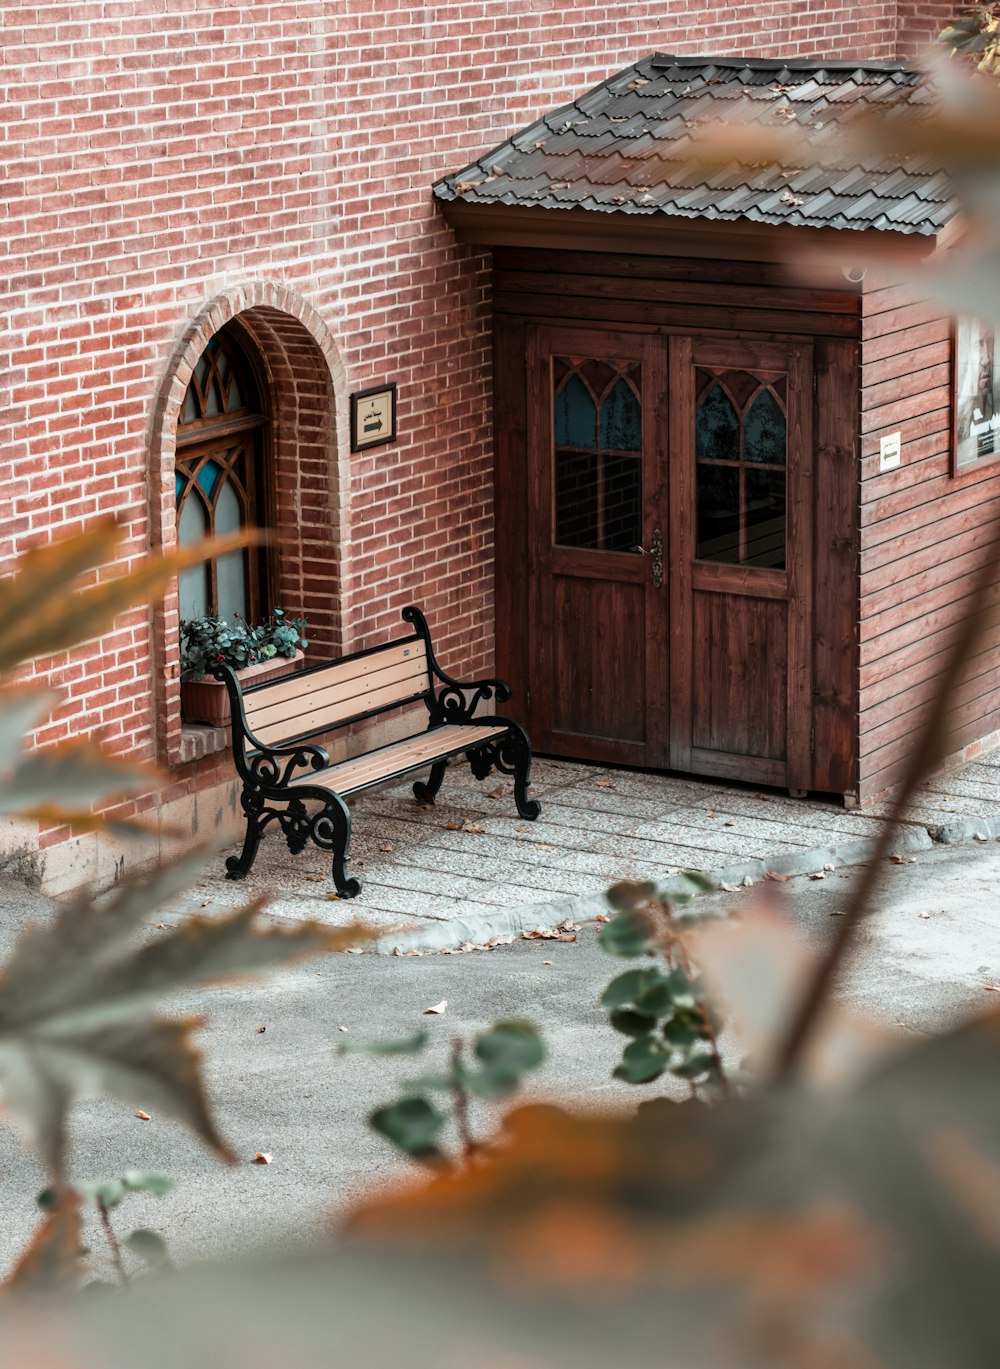 a wooden bench sitting in front of a brick building